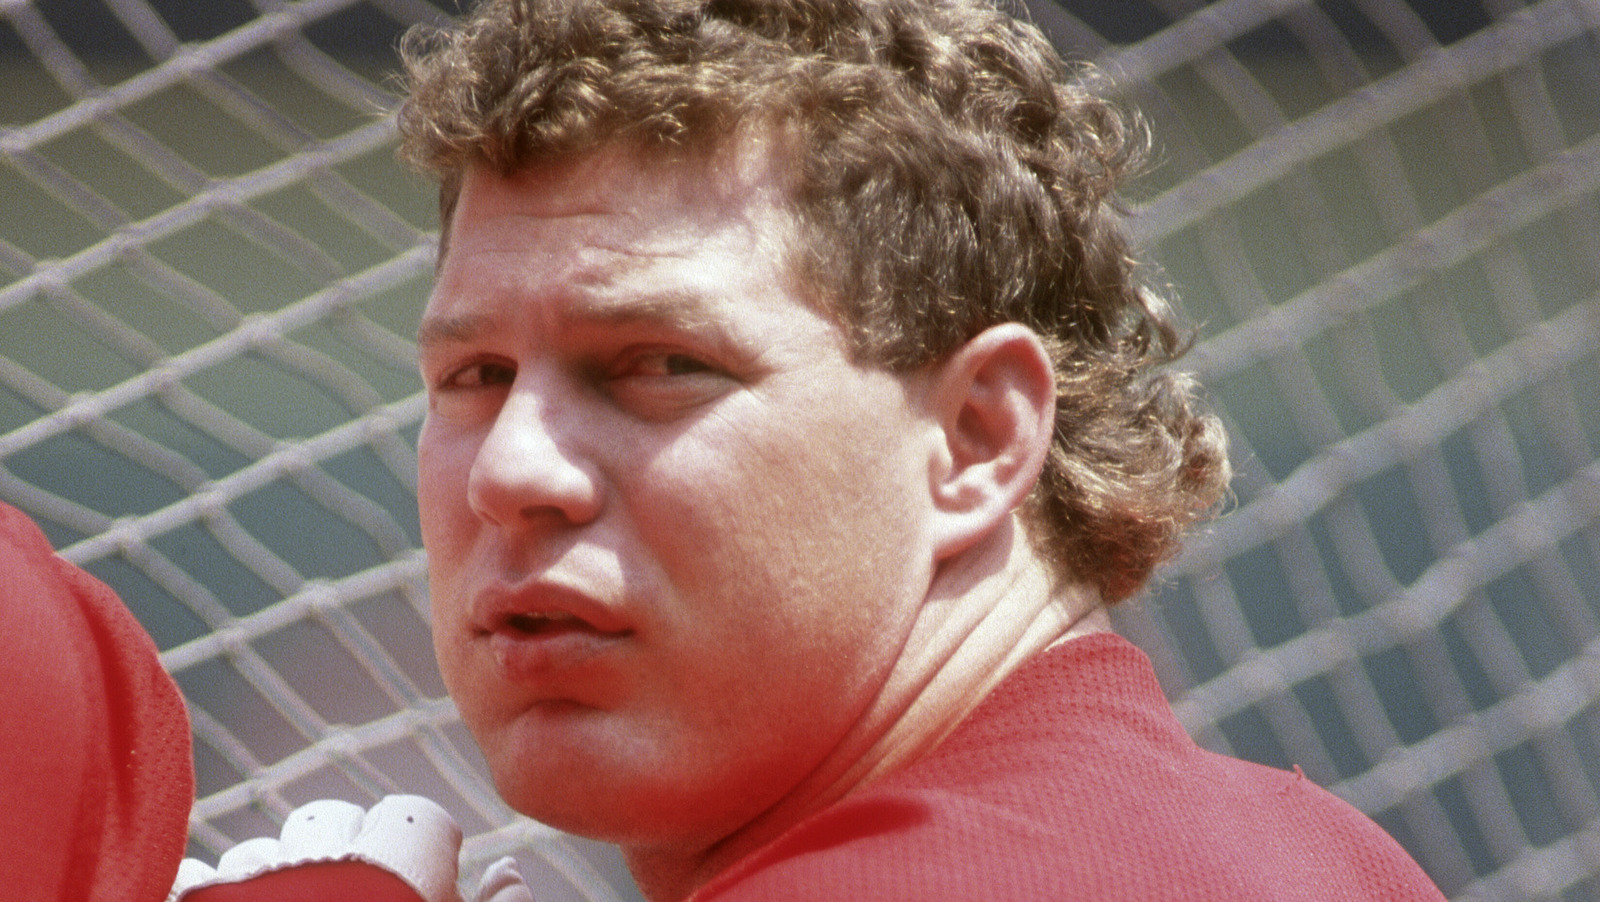 How Is Old Nails” - Lenny Dykstra Once Gushed Over a Three-Time